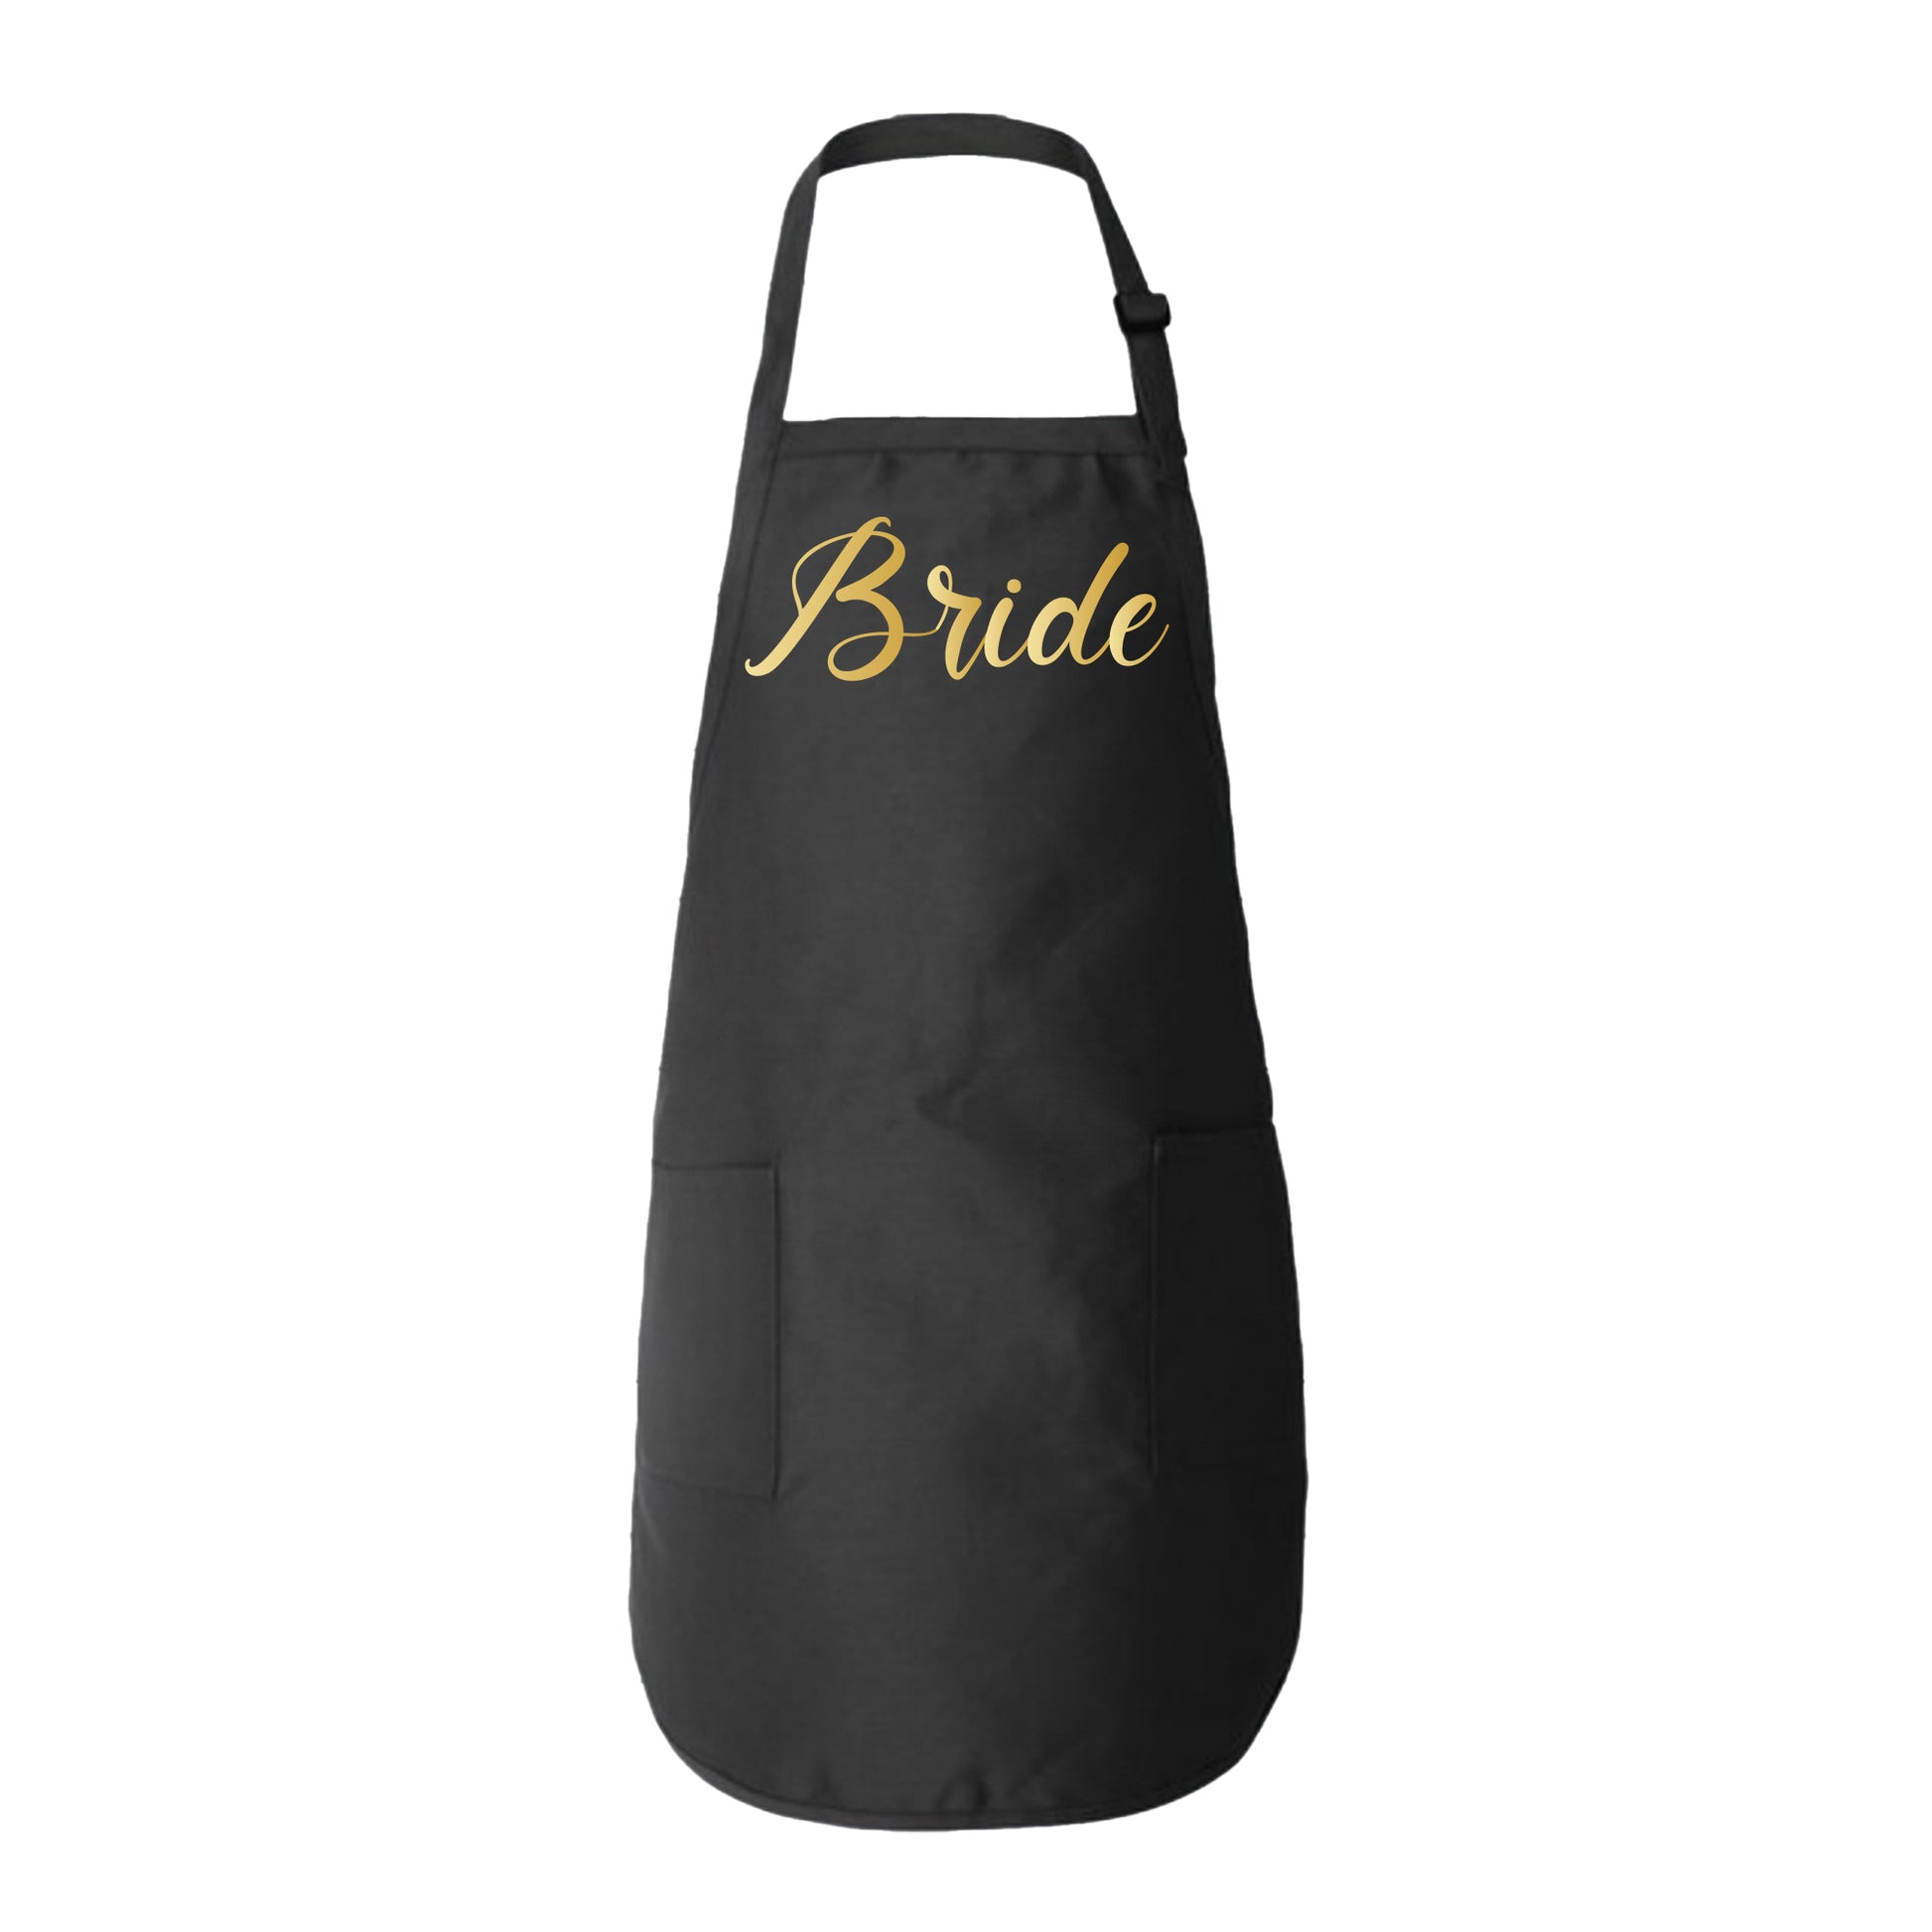 Cute Apron With Pockets, Bride To Be Apron, Wedding Shower Gift For Bride-newamarketing